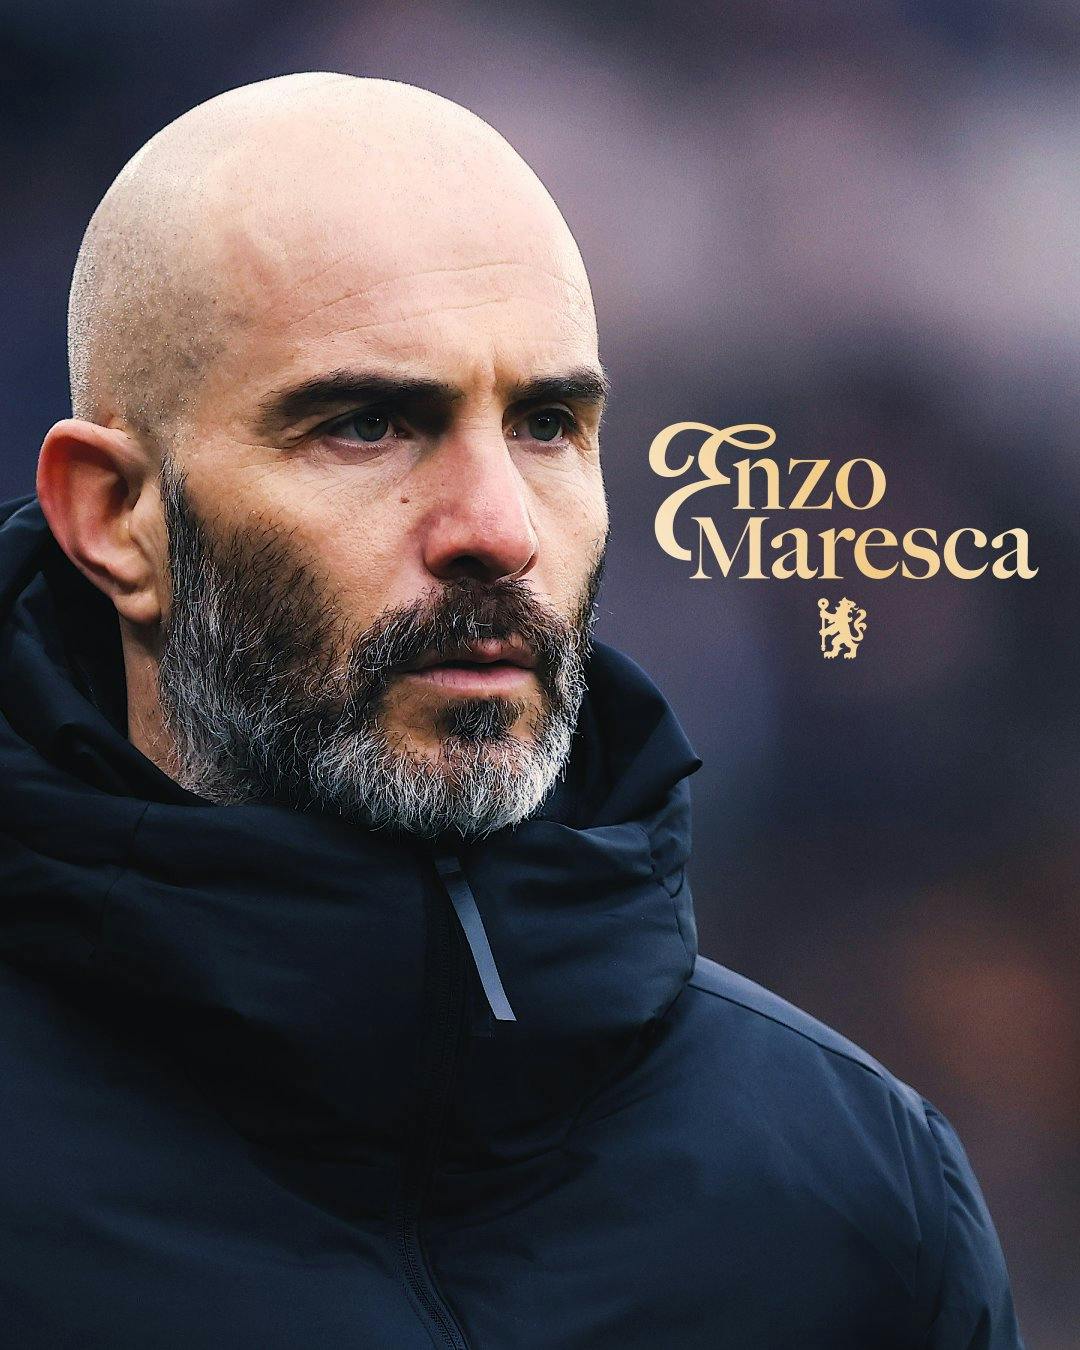 Episode 180 “Maresca makes the move to Chelsea”